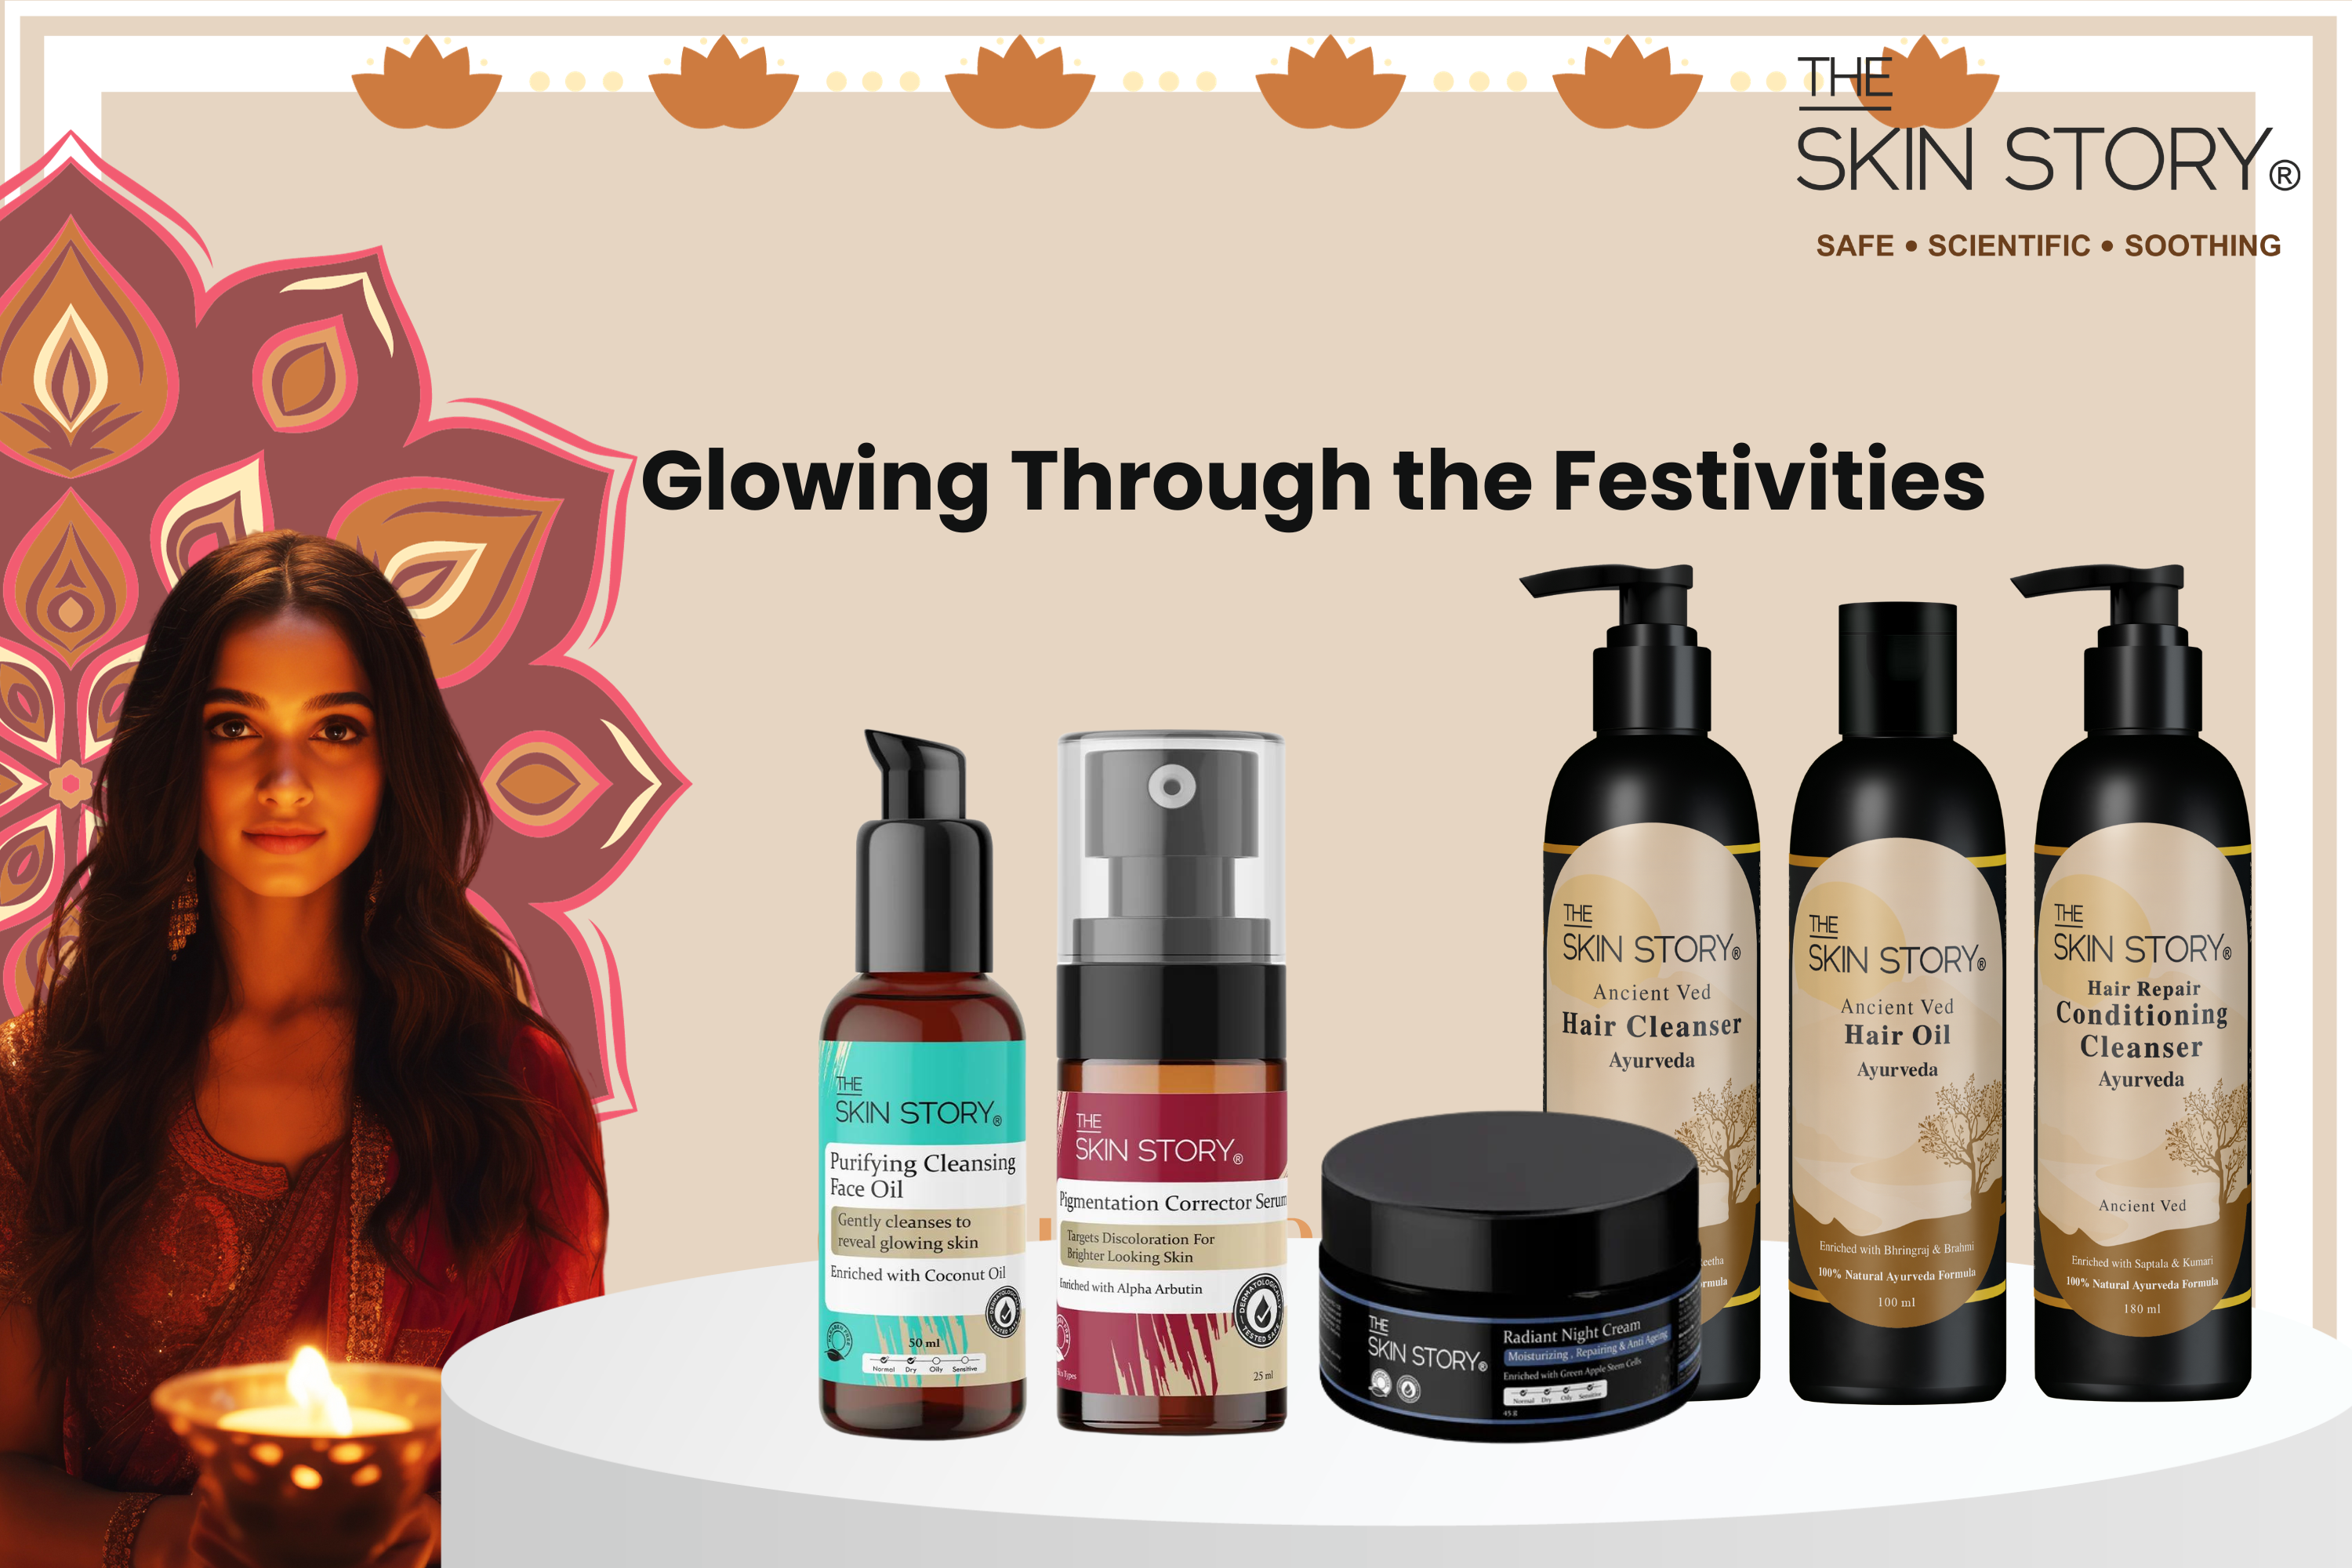 Glowing Through the Festivities: Your Ultimate Skincare Guide for the Festive Season with The Skin Story